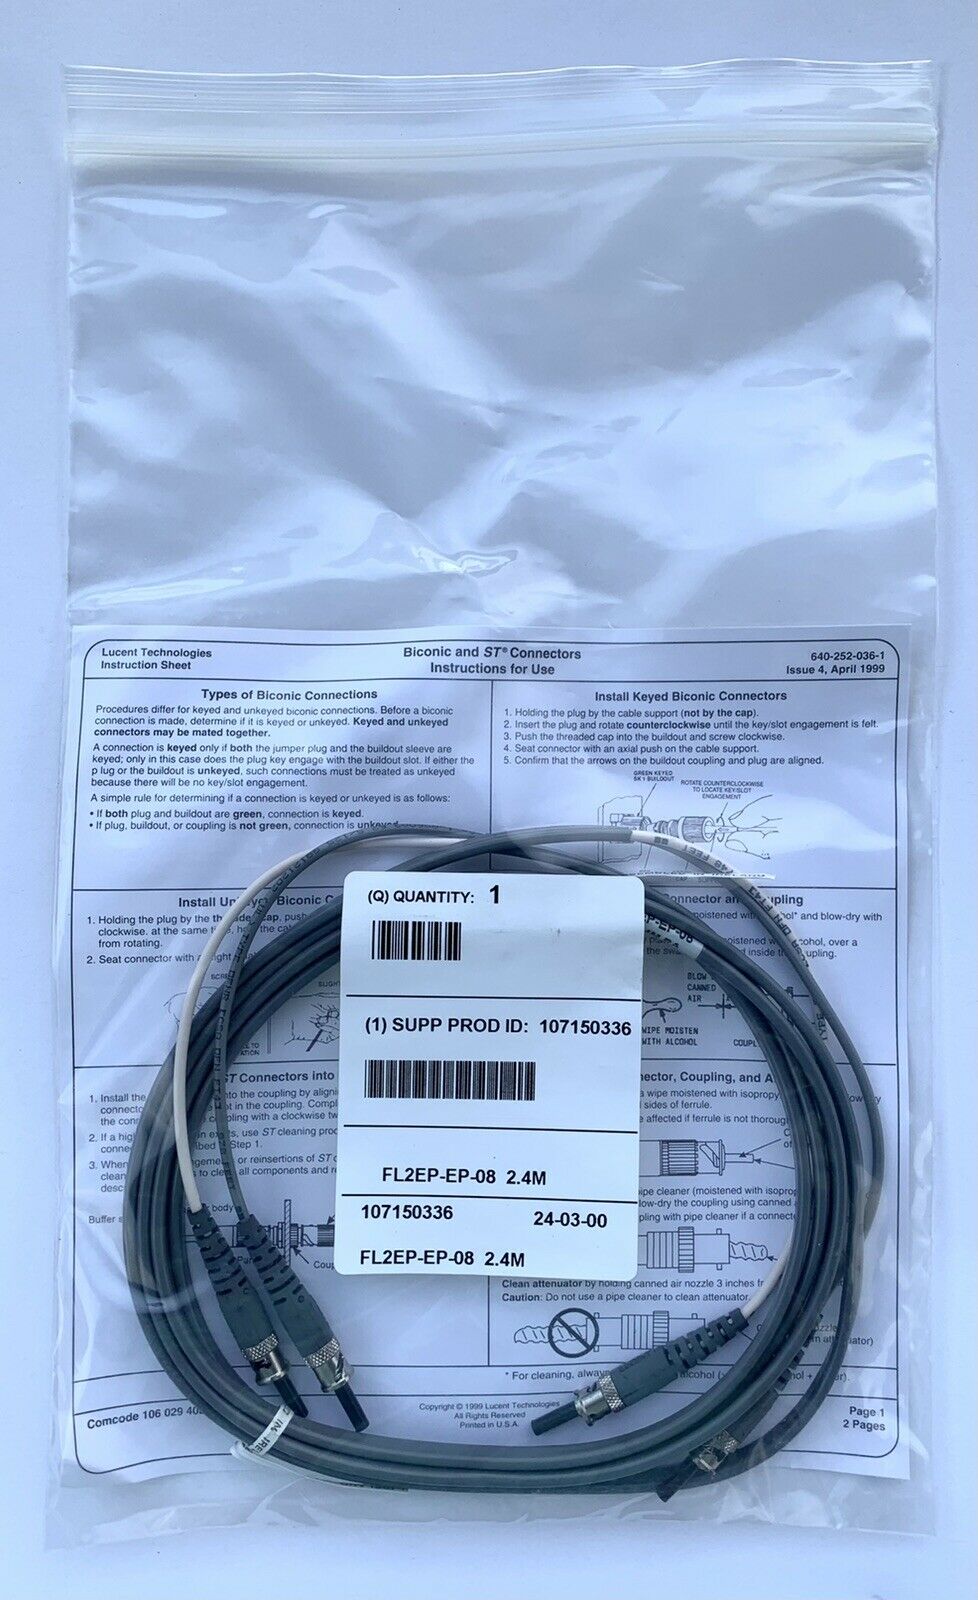 New In Package: Lucent Fiber Optic Cable: Fl2ep-ep-08 2.4m - Part # 107150336